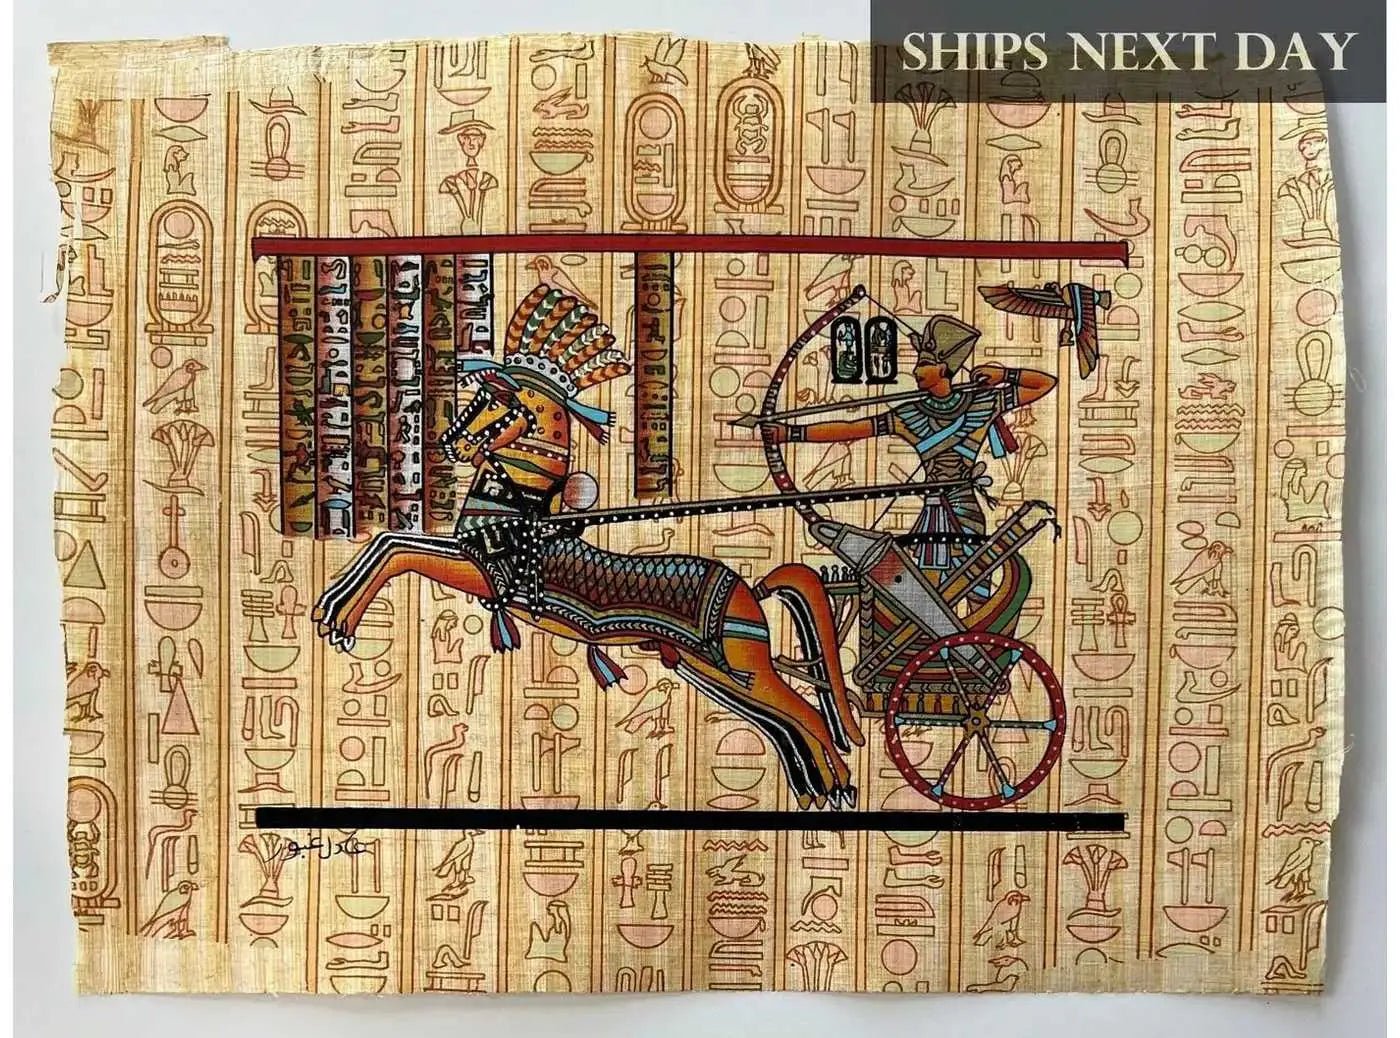 Ramses the Great - The Gold Of The Pharaohs - Battle of Kadesh - Great Gift On Chariot Hieroglyphs Papyrus